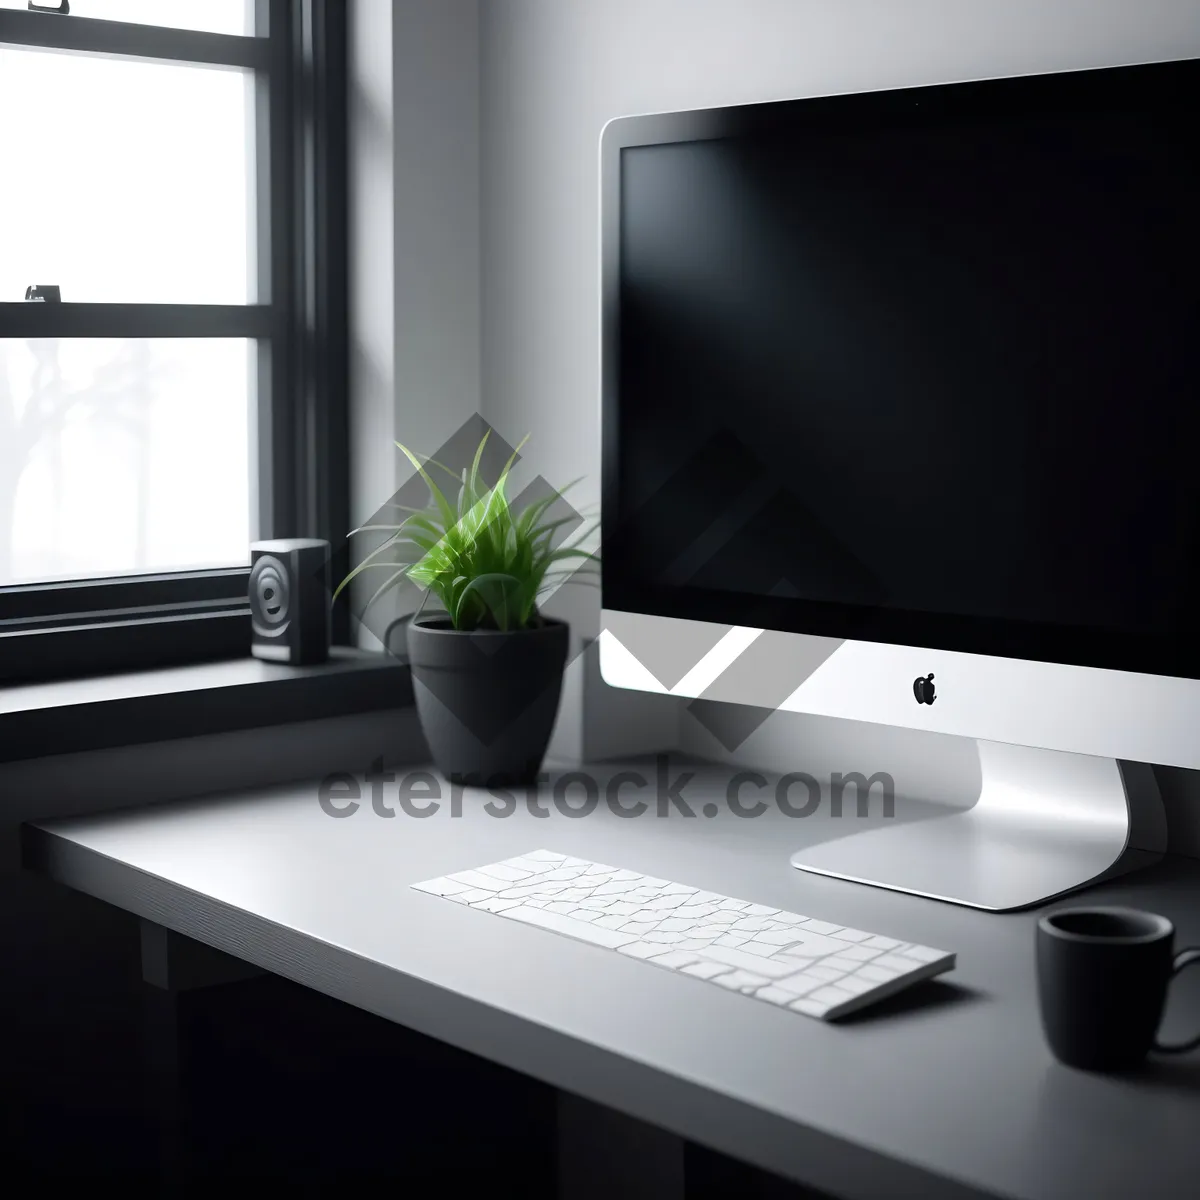 Picture of Modern Office Desktop with Digital Equipment